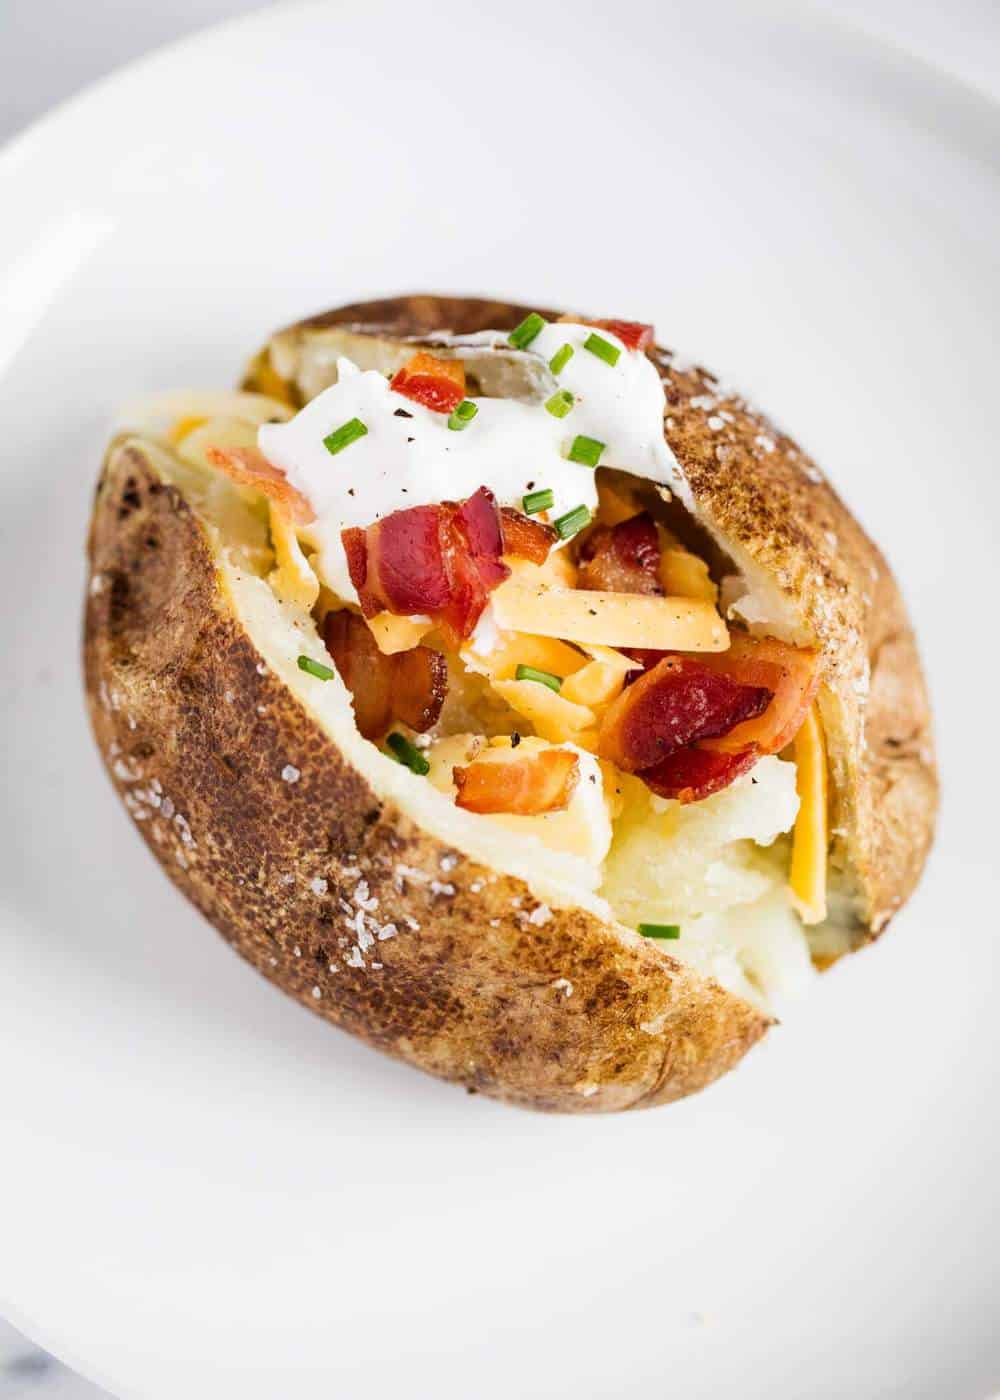 Loaded baked potato with cheese, sour cream, bacon and chives.